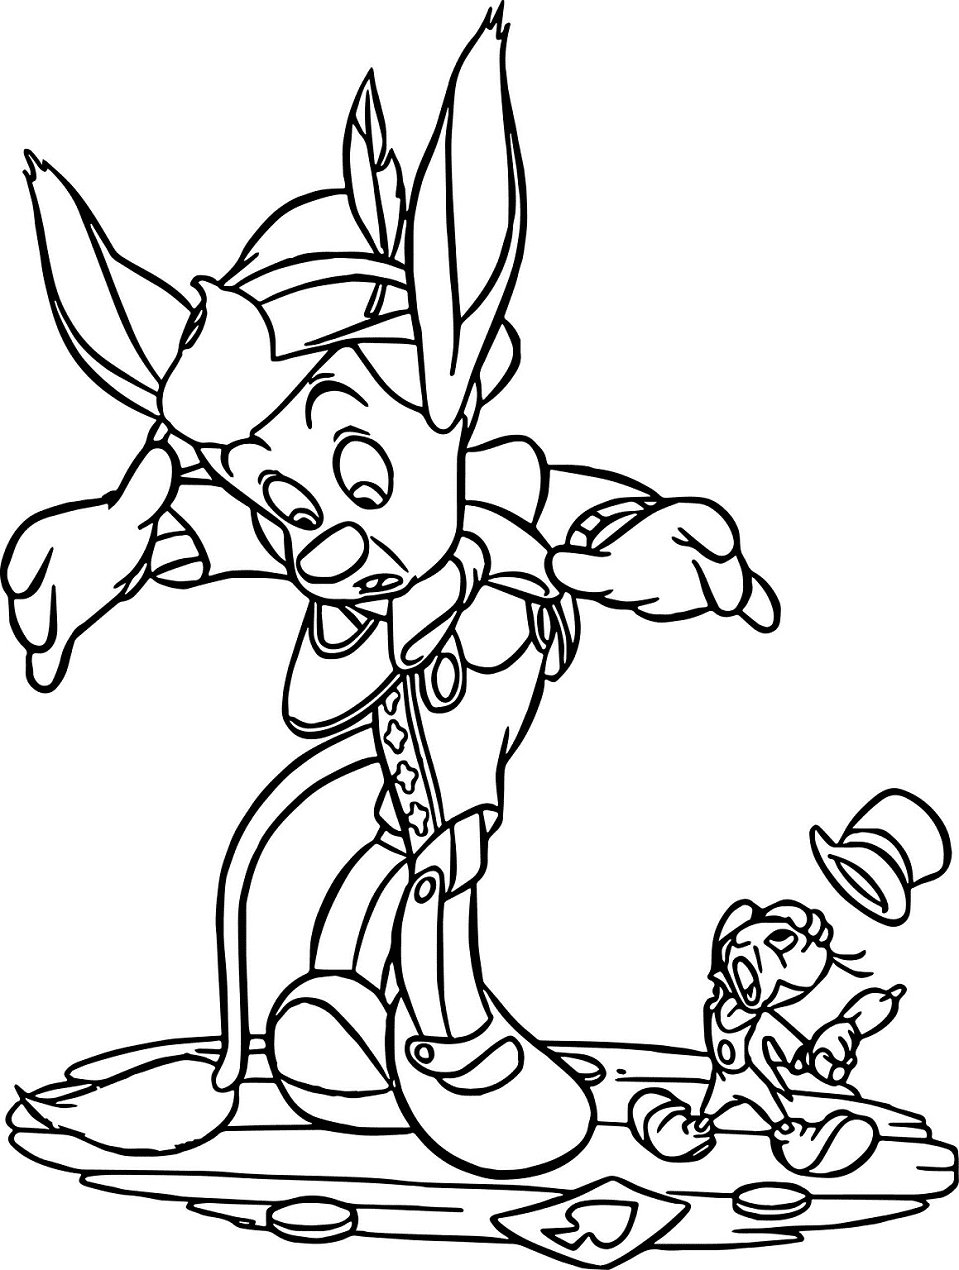 Pinocchio And Jiminy Cricket Coloring Page